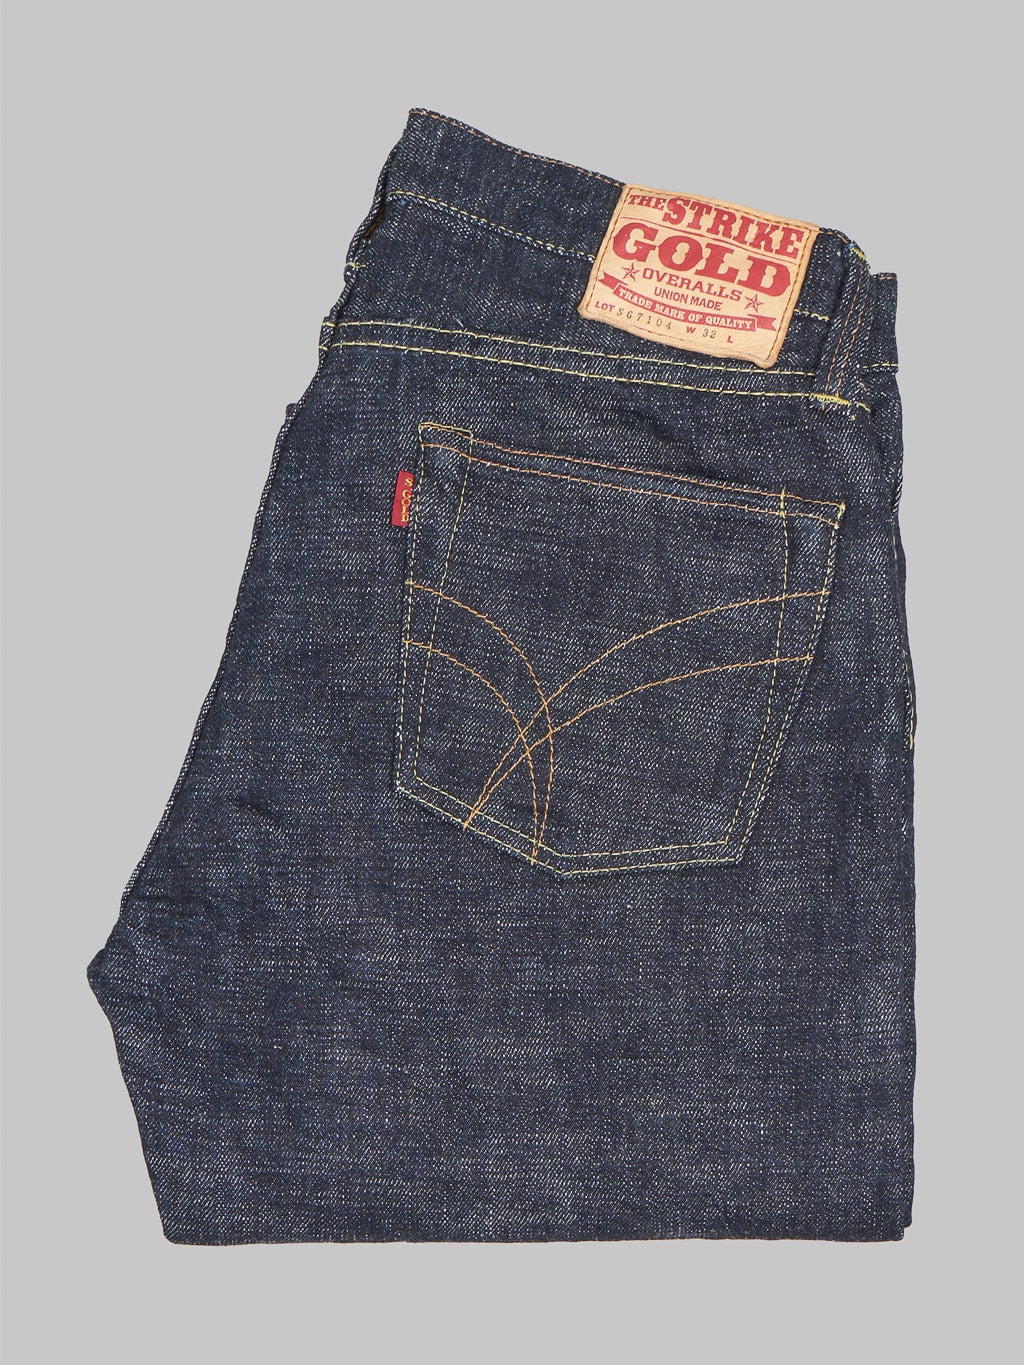 the strike gold 7104 ultra slubby straight tapered jeans japanese